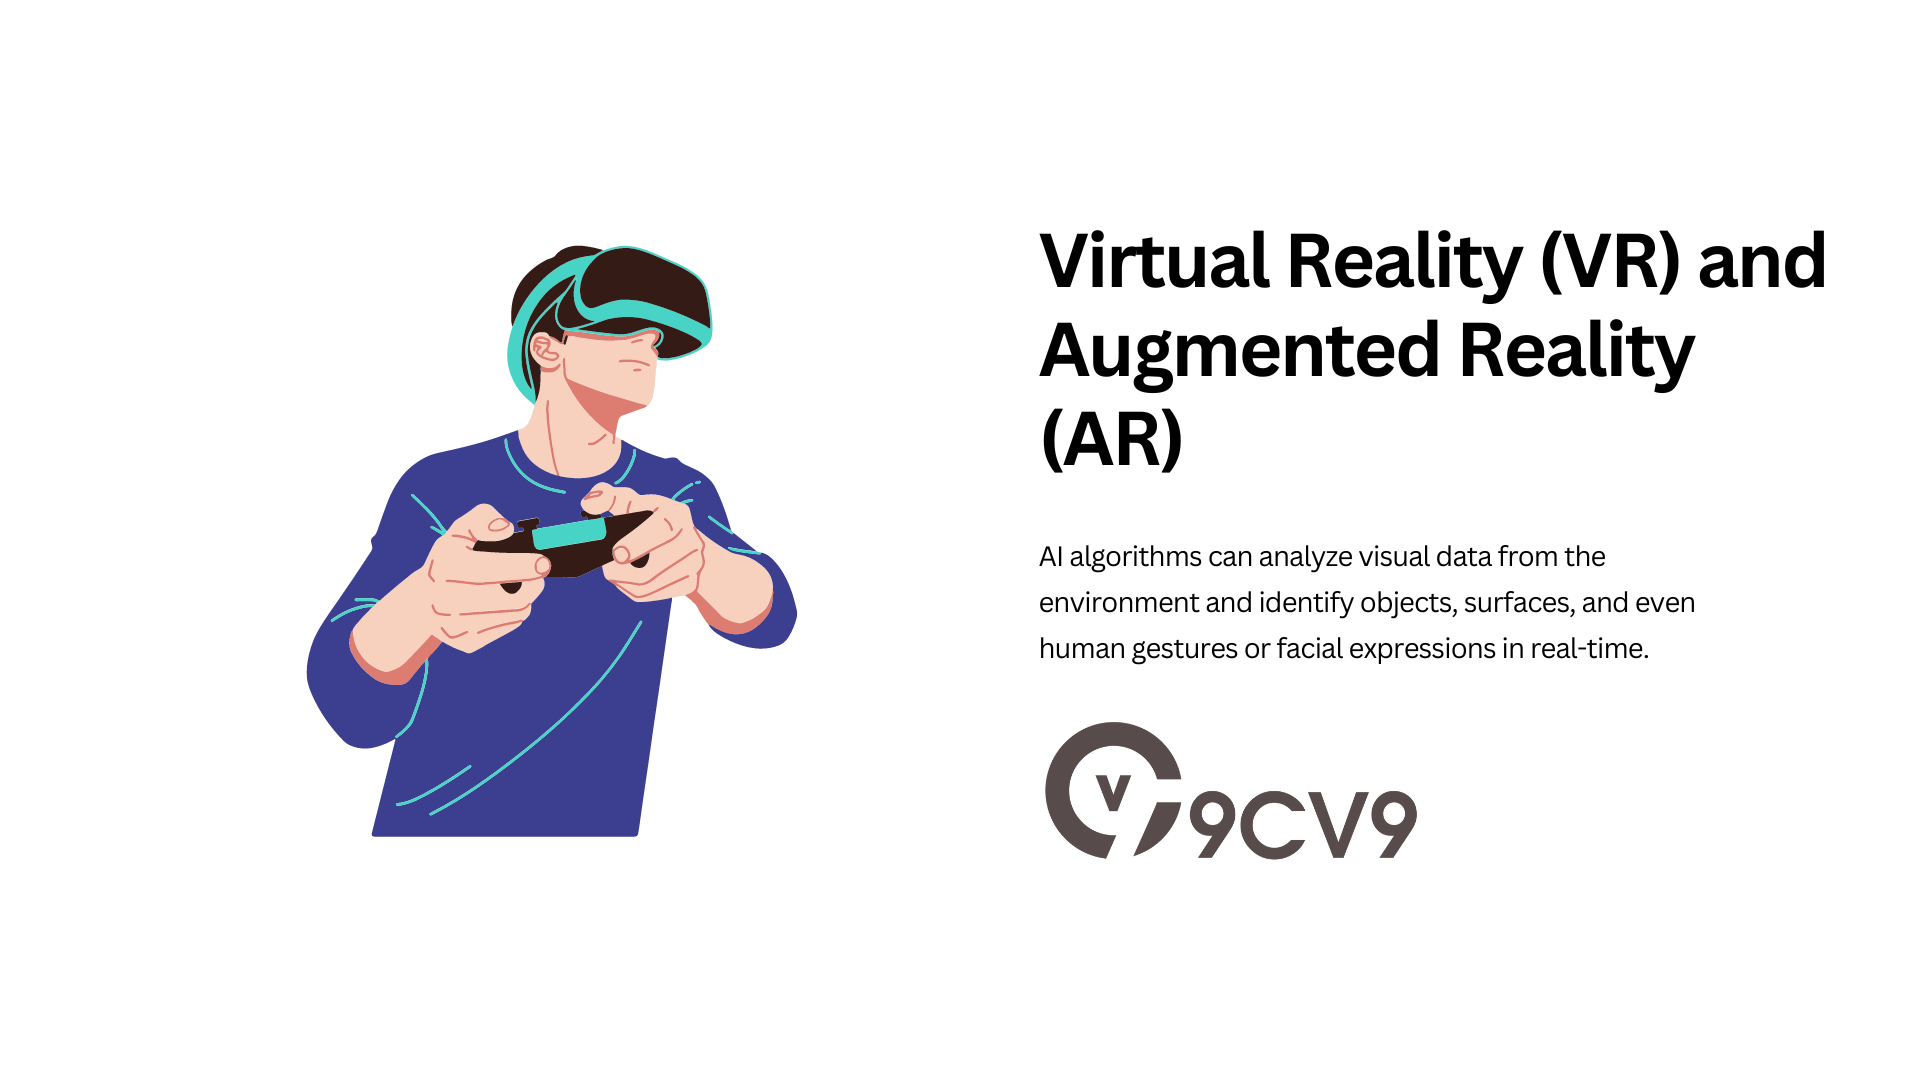 AI-Enabled Virtual Reality (VR) and Augmented Reality (AR) - Redefining Immersive Experiences with AI